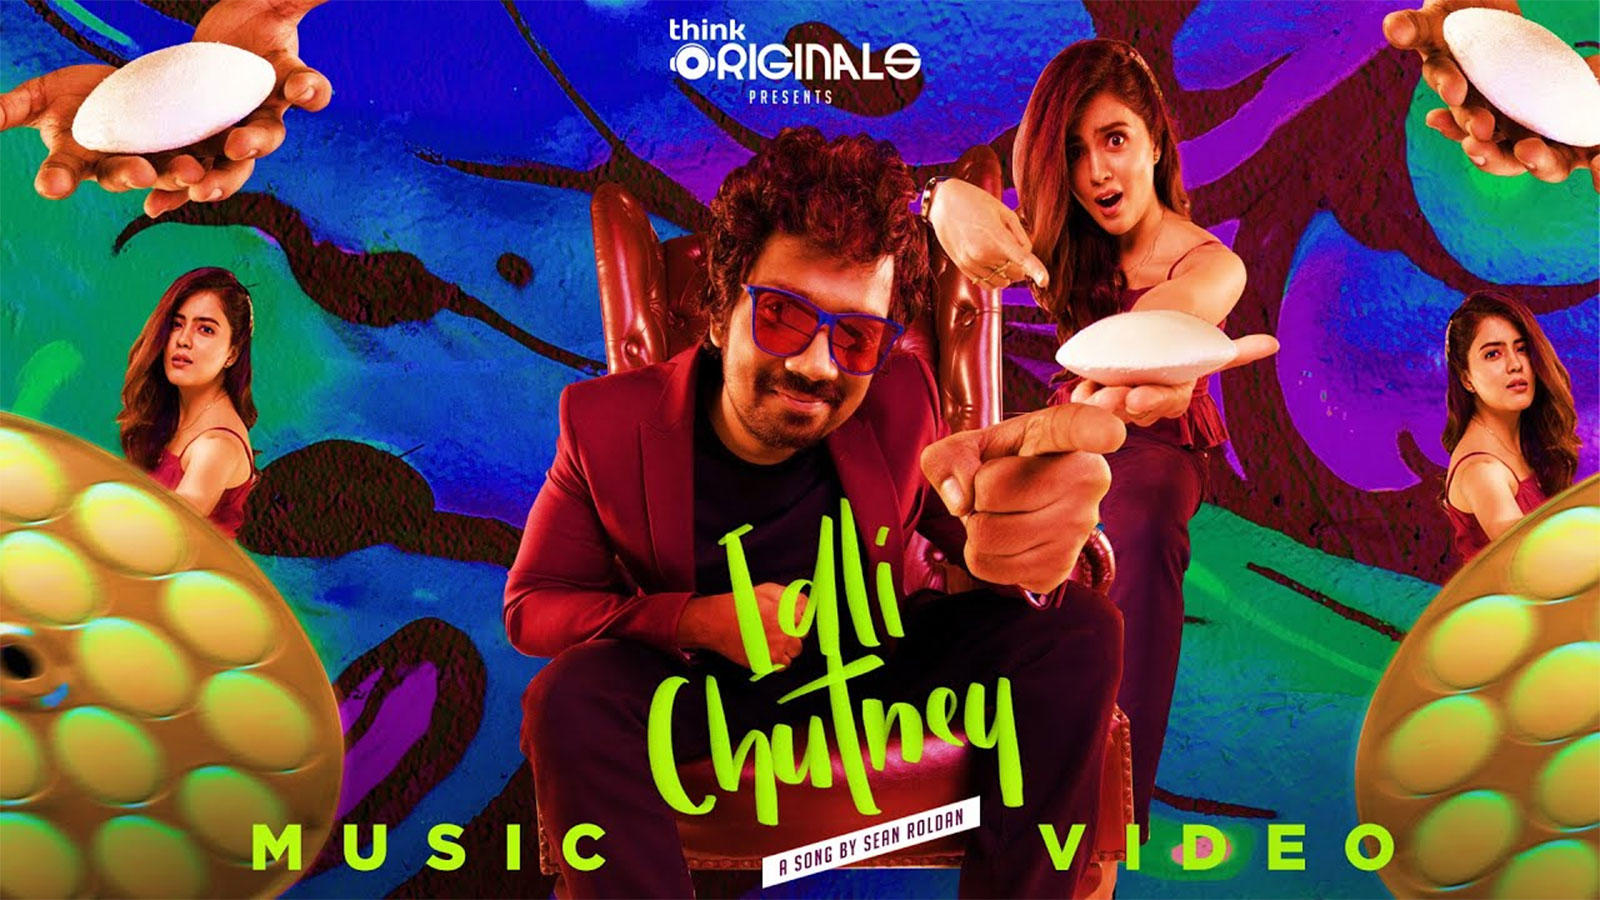 Tamil Gana Video Song: Latest Tamil Song 'Idli Chutney' Sung by Sean Roldan  Featuring Amritha | Tamil Video Songs - Times of India